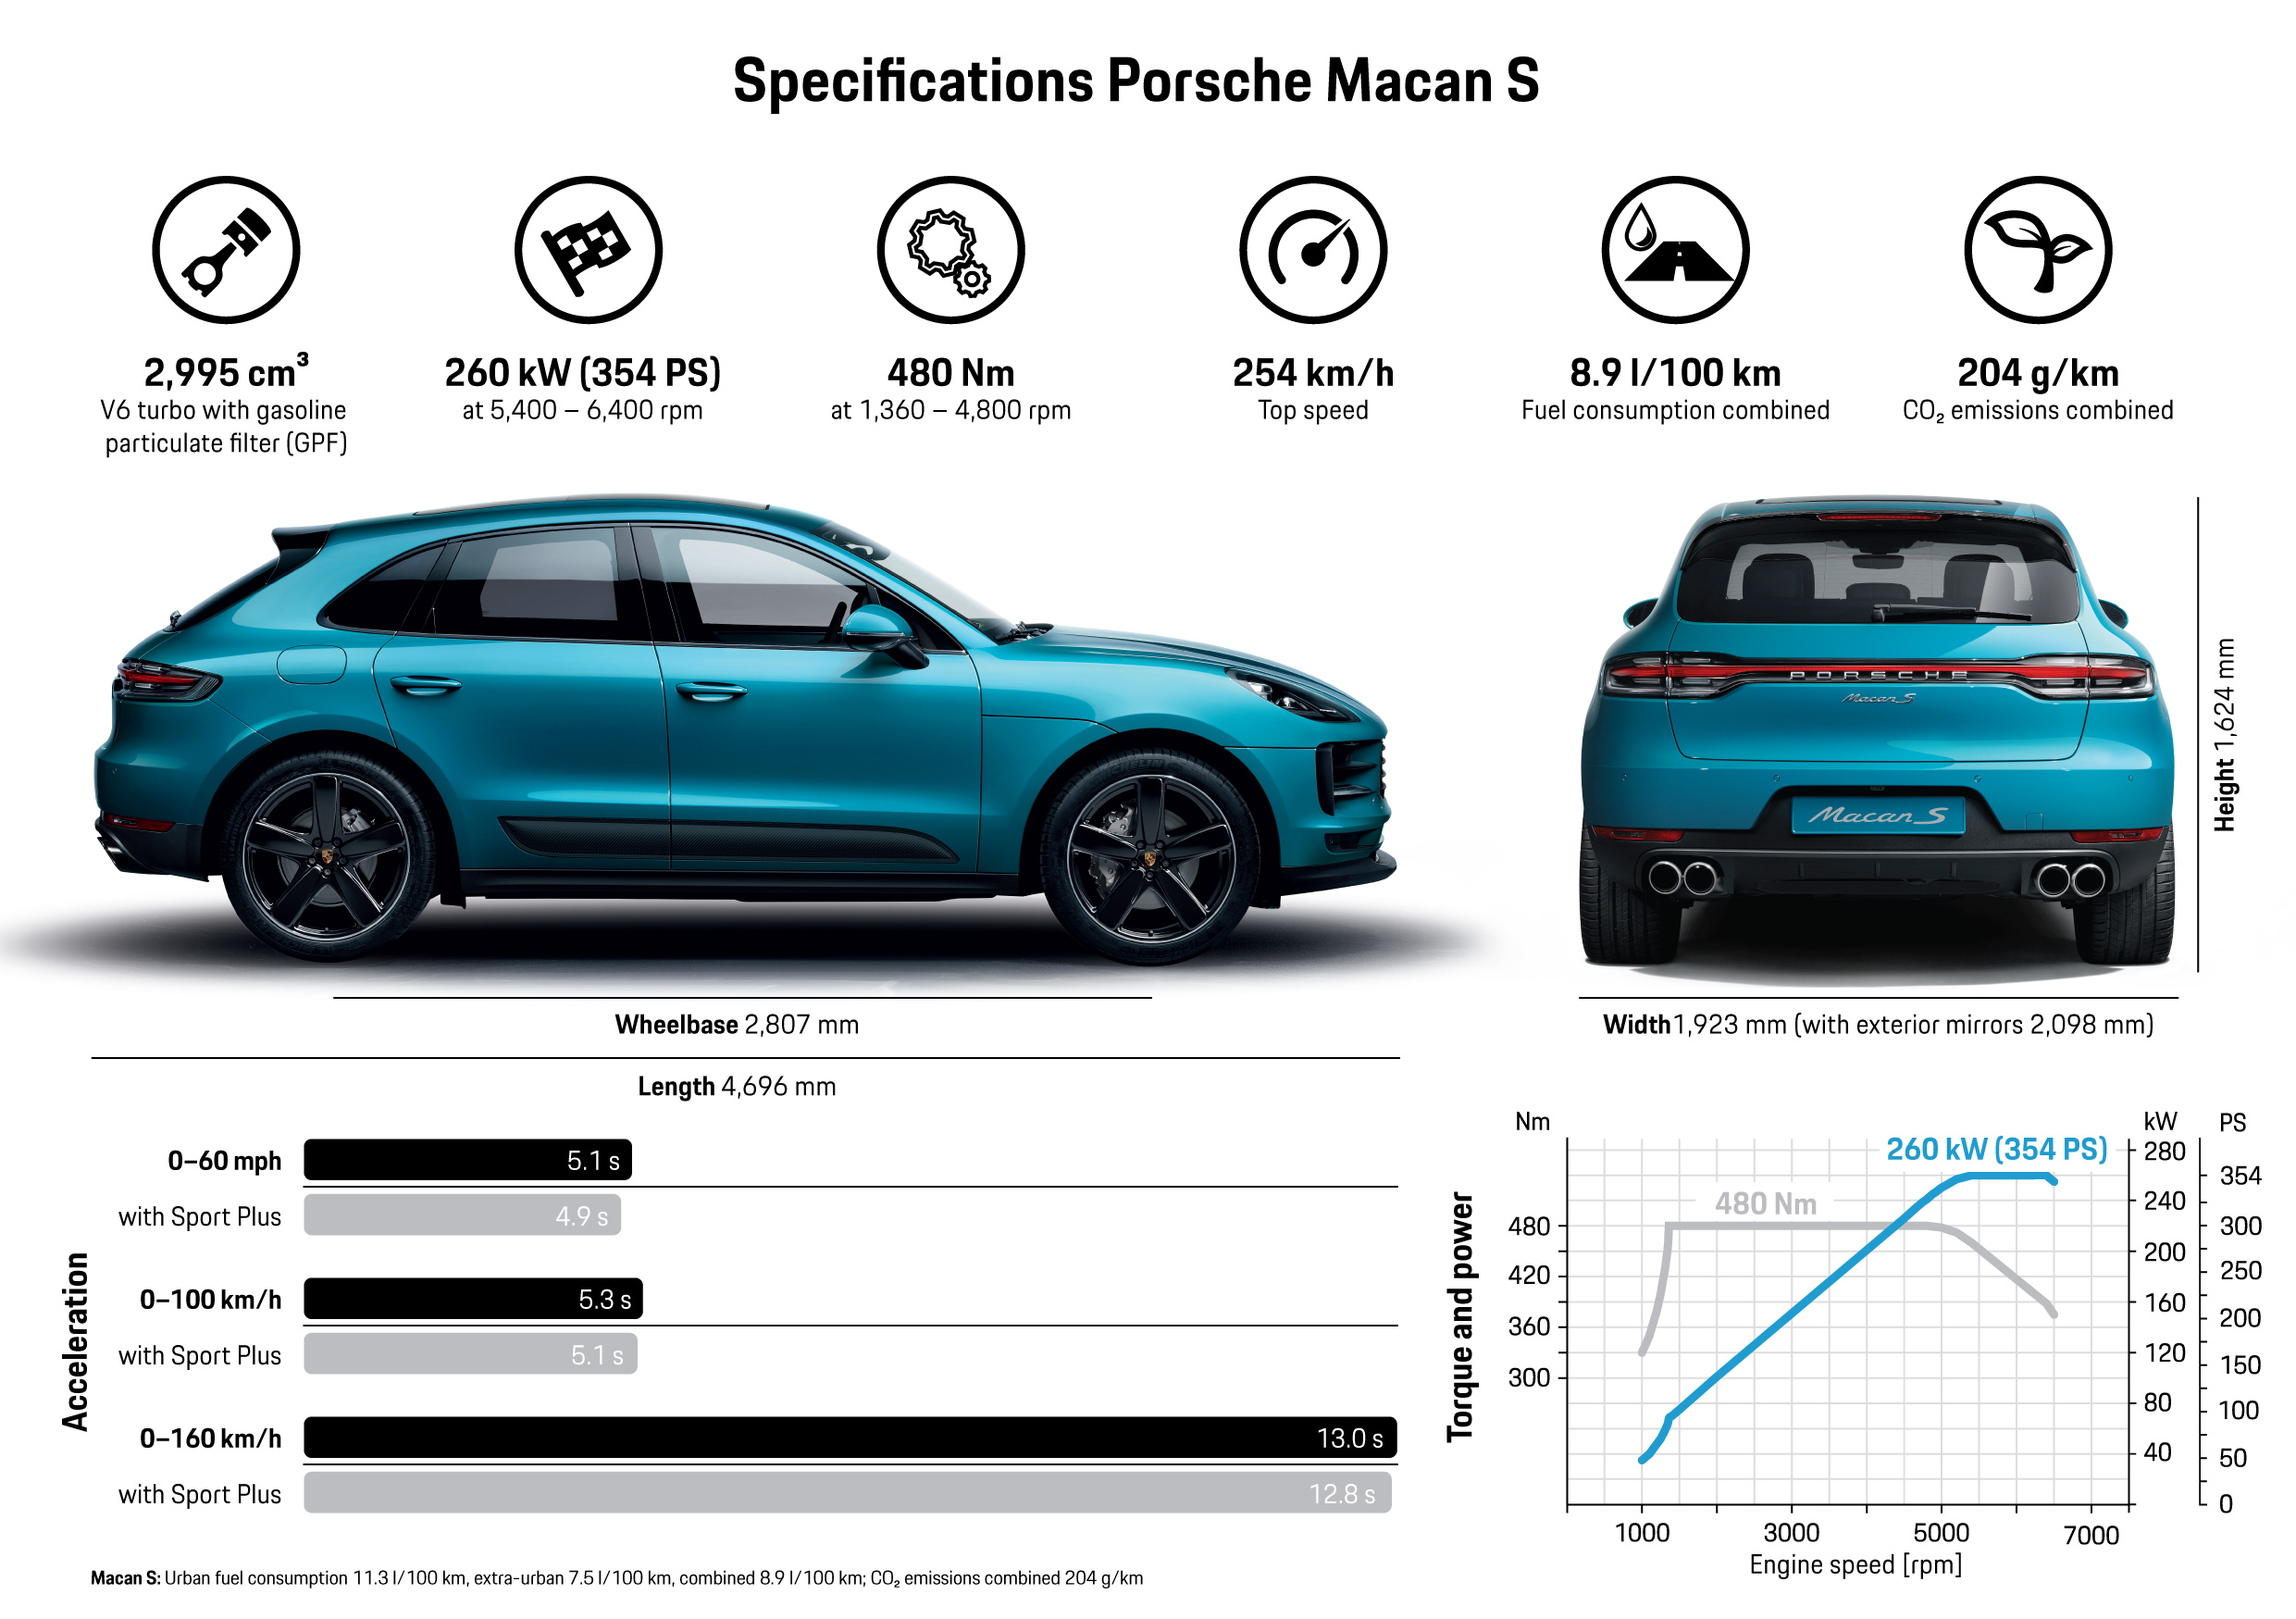 The new Macan S, infographic, 2018, Porsche AG